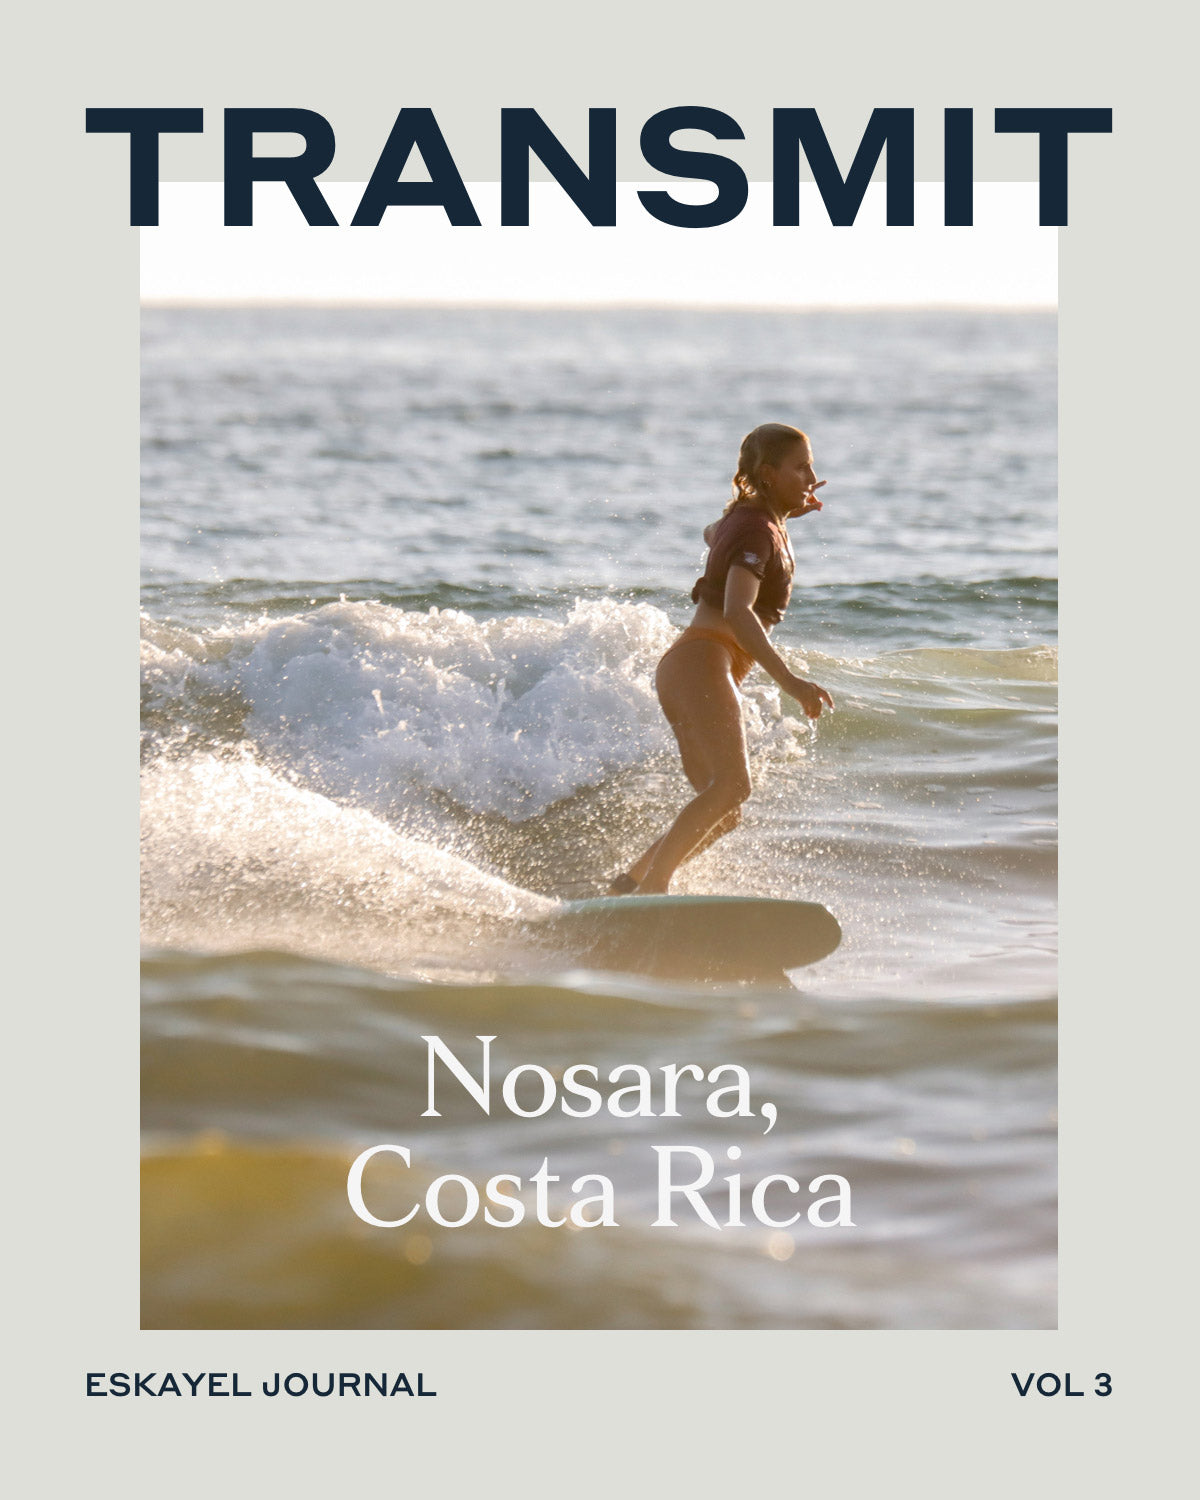 A woman is riding a surfboard on the cover of transmist in Costa Rica